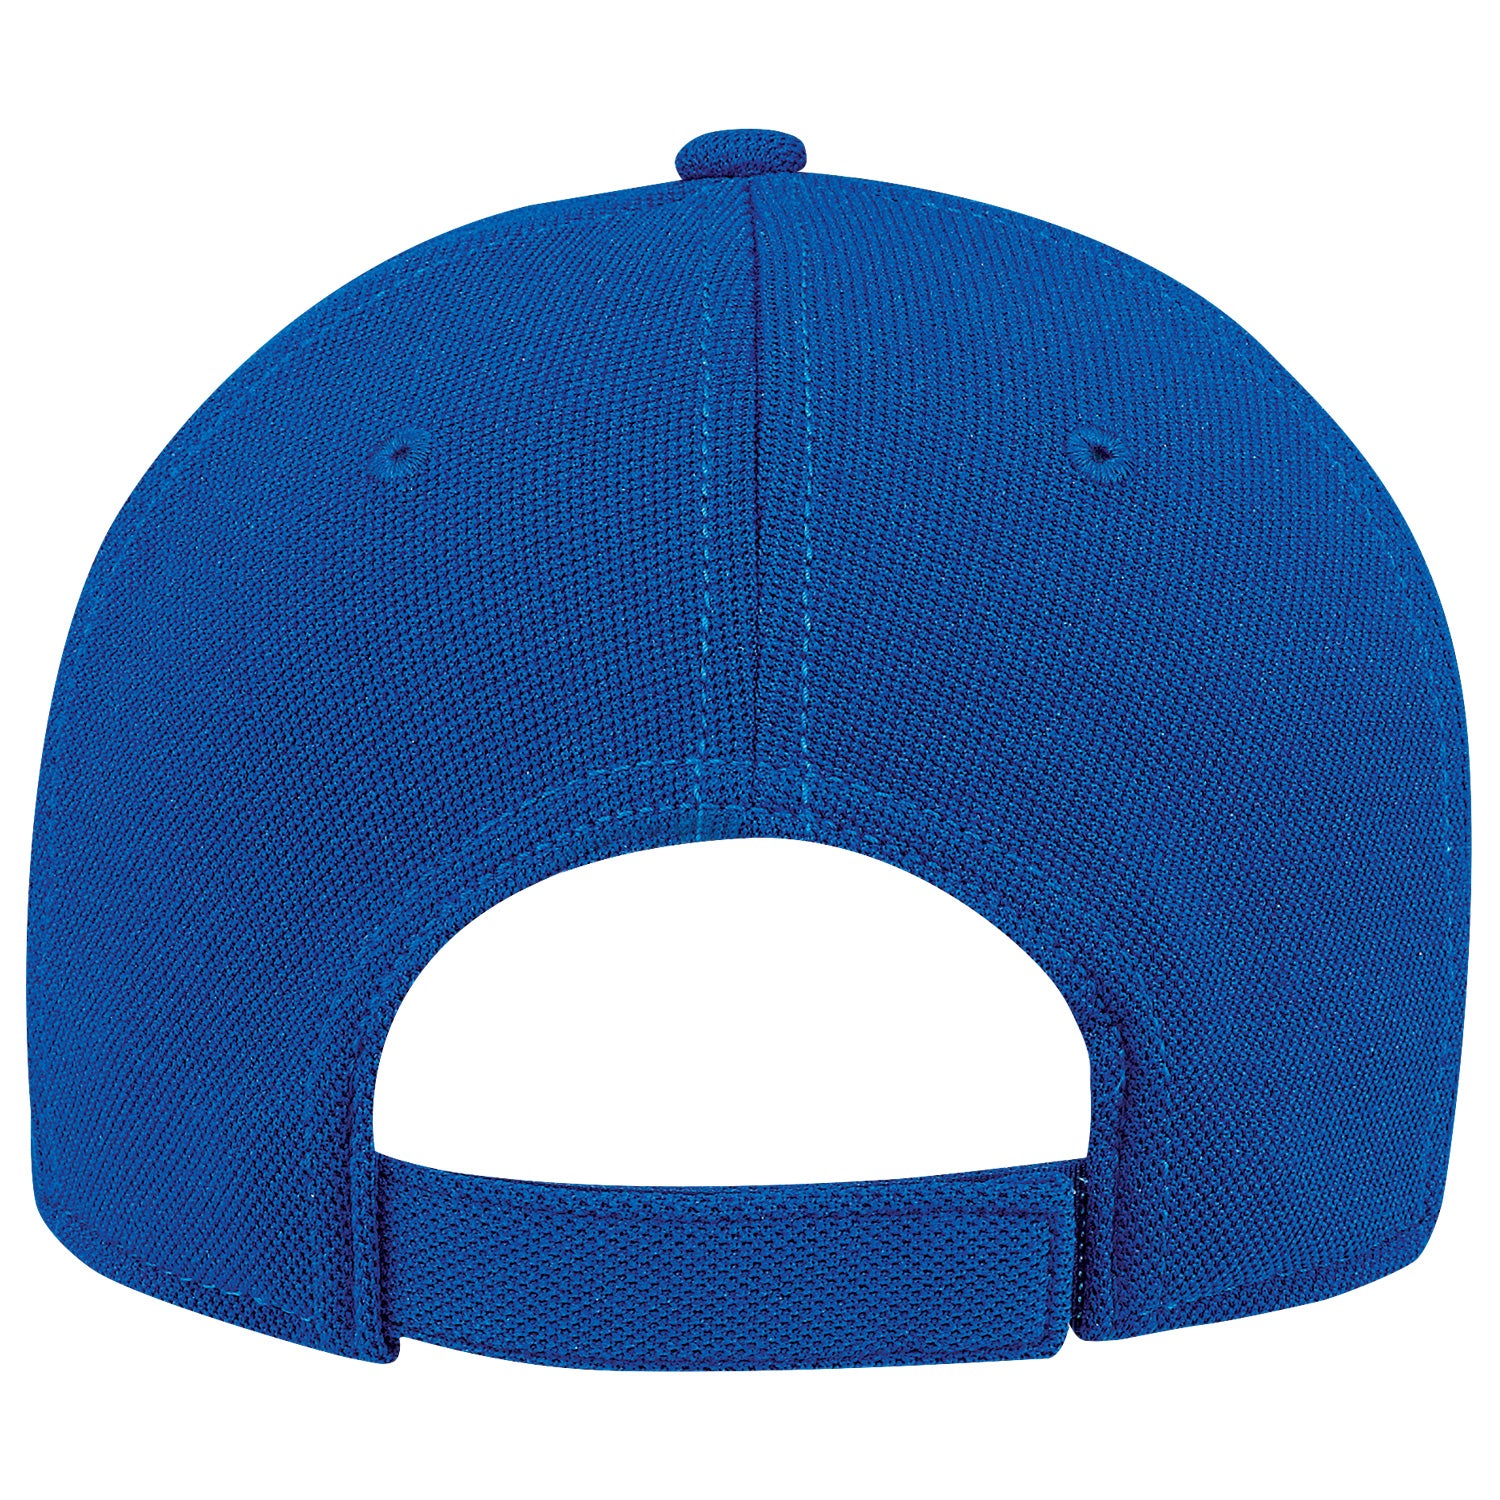 AJM Deluxe Polyester 6 Panel Constructed Contour Cap with velcro closure